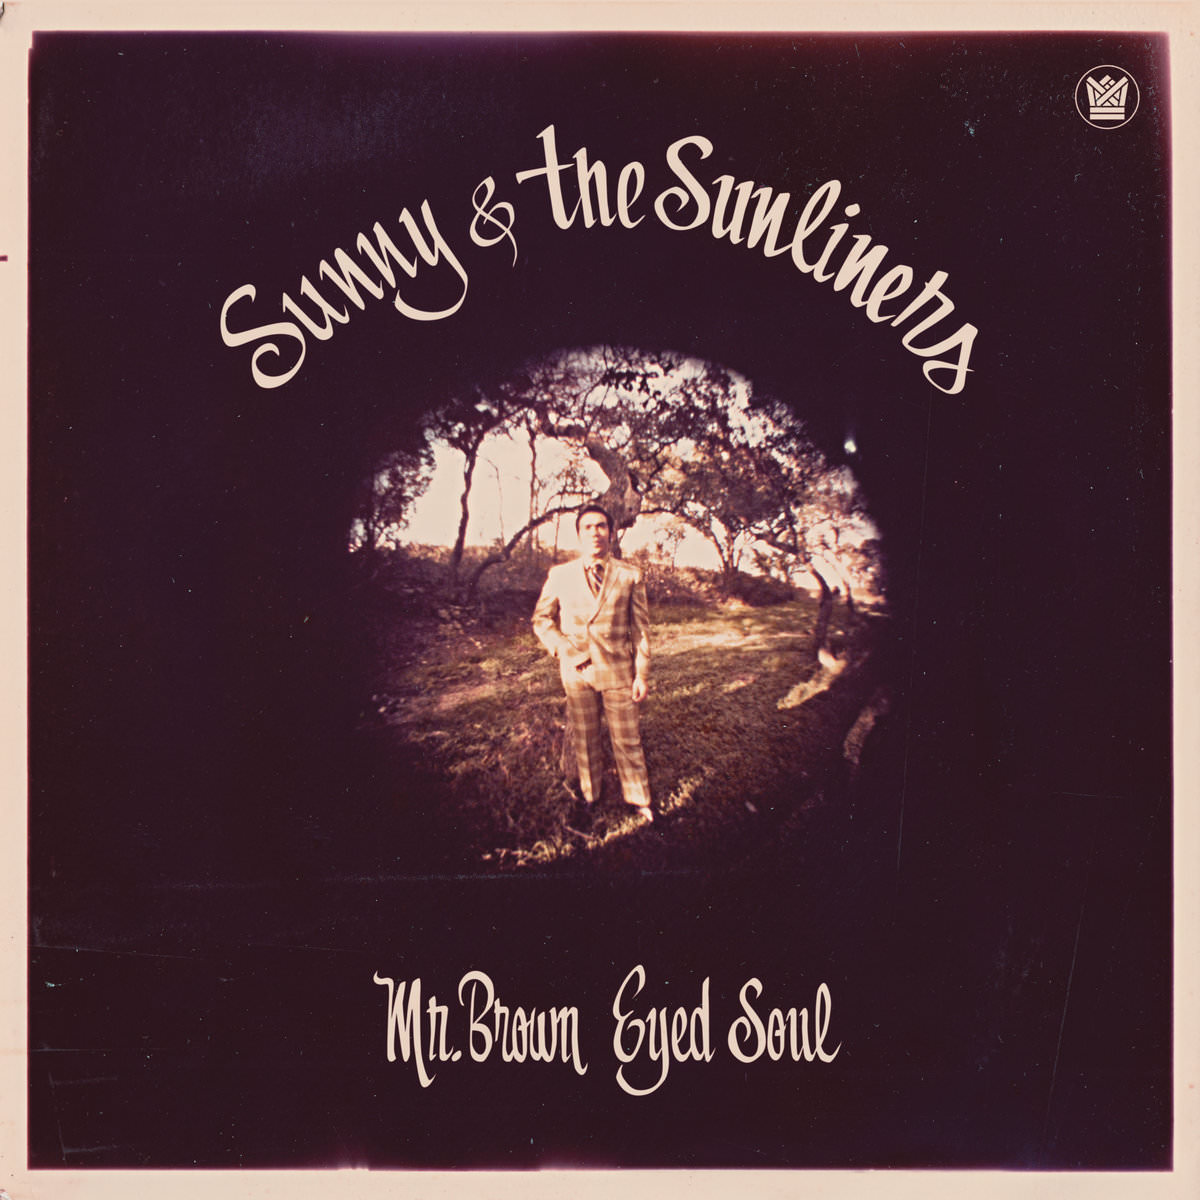 Sunny & The Sunliners – Mr. Brown Eyed Soul (2017) [Qobuz FLAC 24bit/44,1kHz]